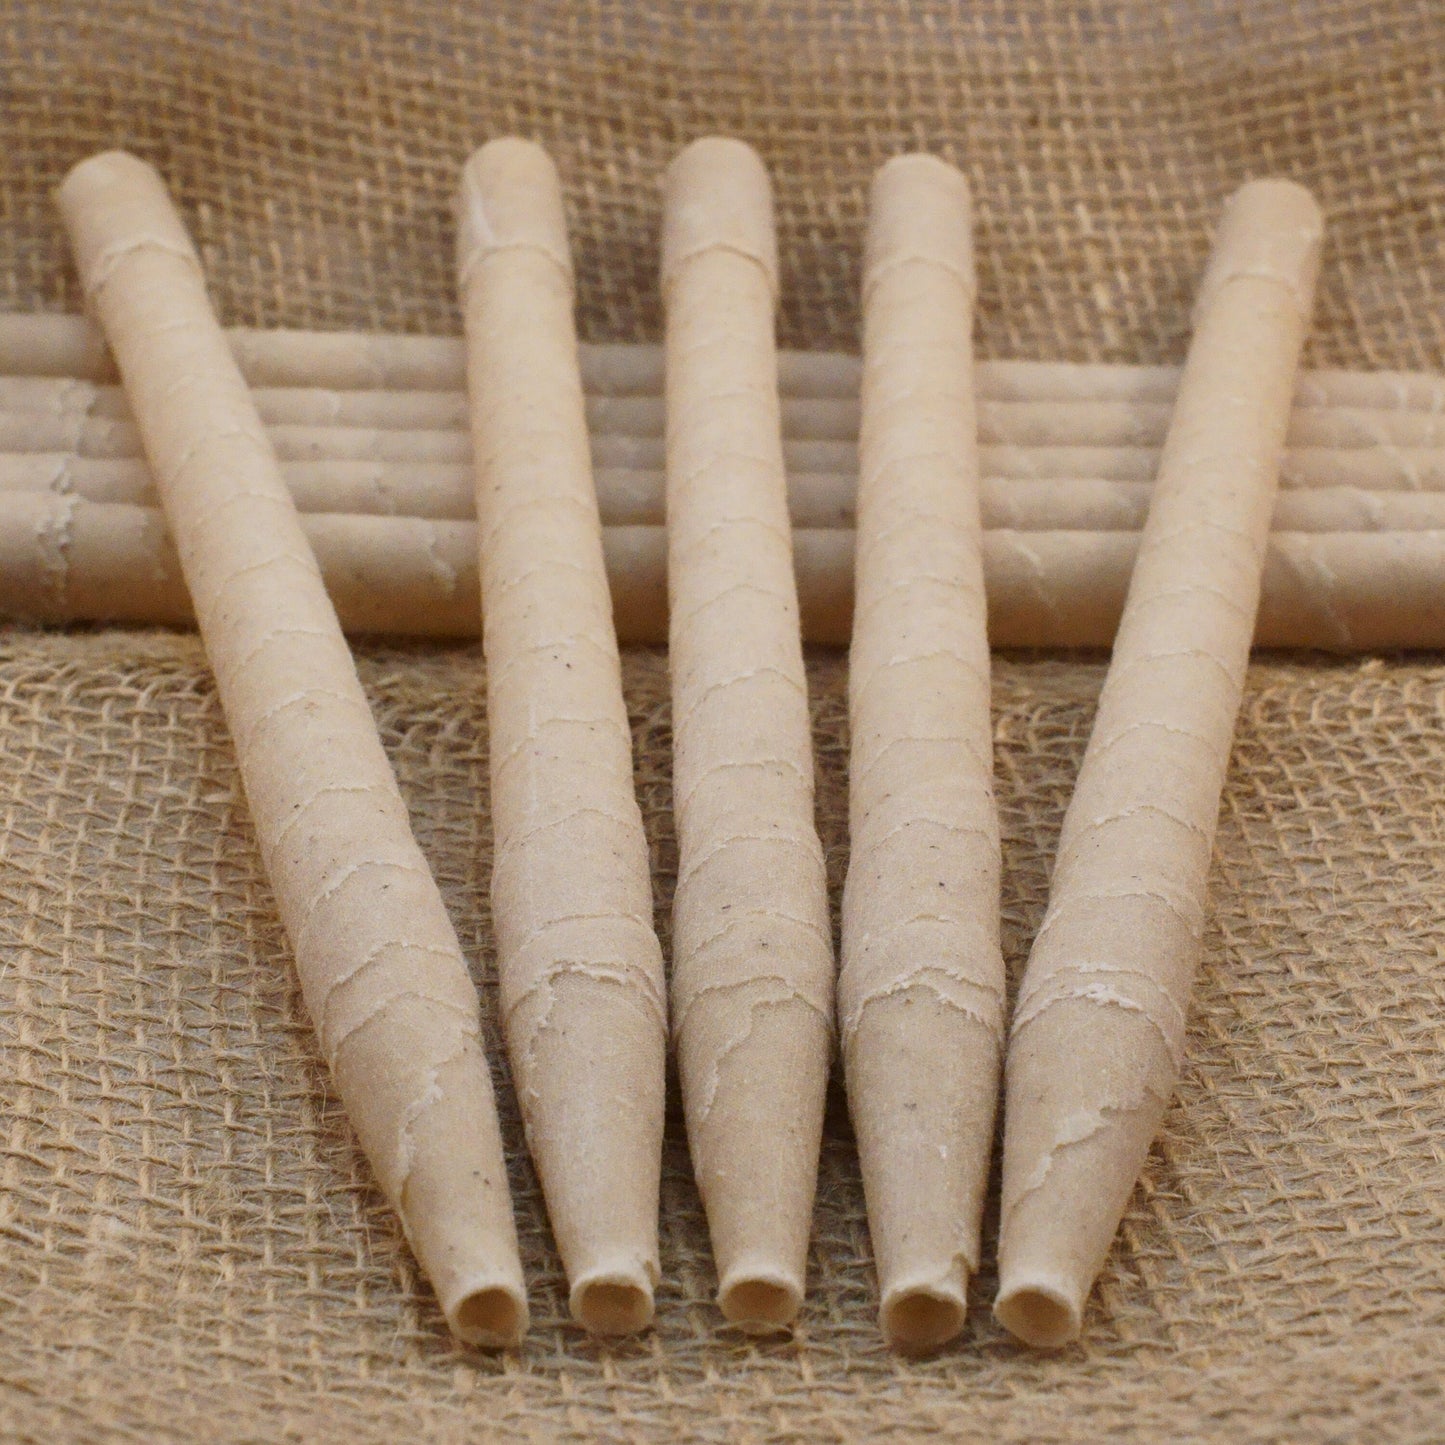 Ear Candles 10pk - Paraffin Wax Cones Cylinders for Ear Candling - Made in the USA